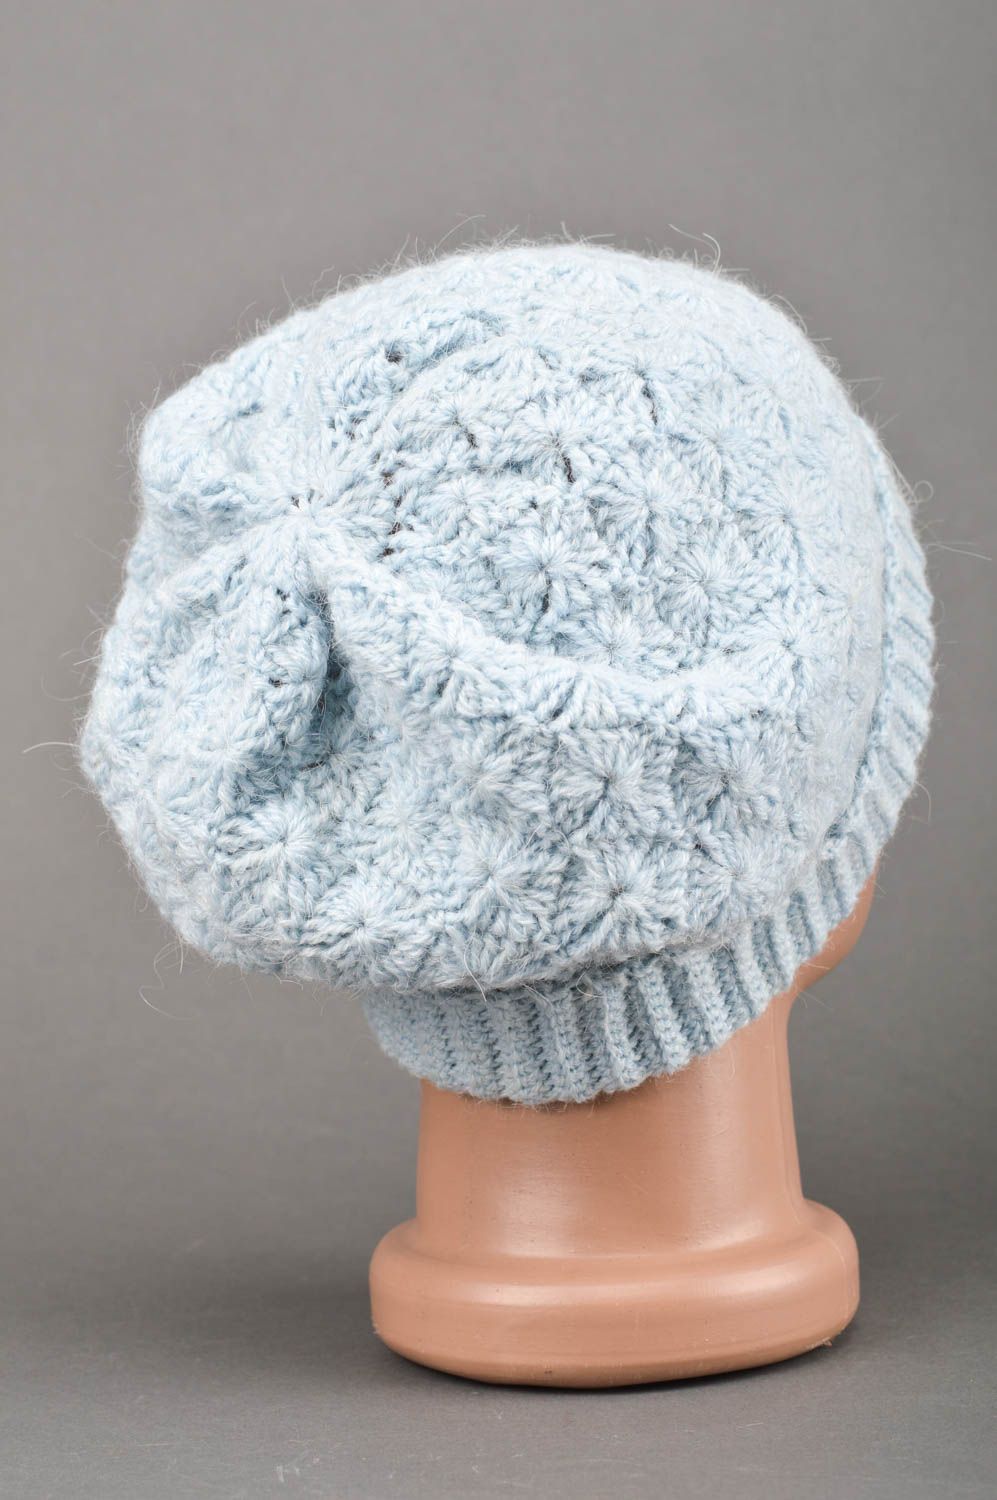 Crocheted hat handmade winter hat beanie hats for women fashion hats cool gifts photo 5